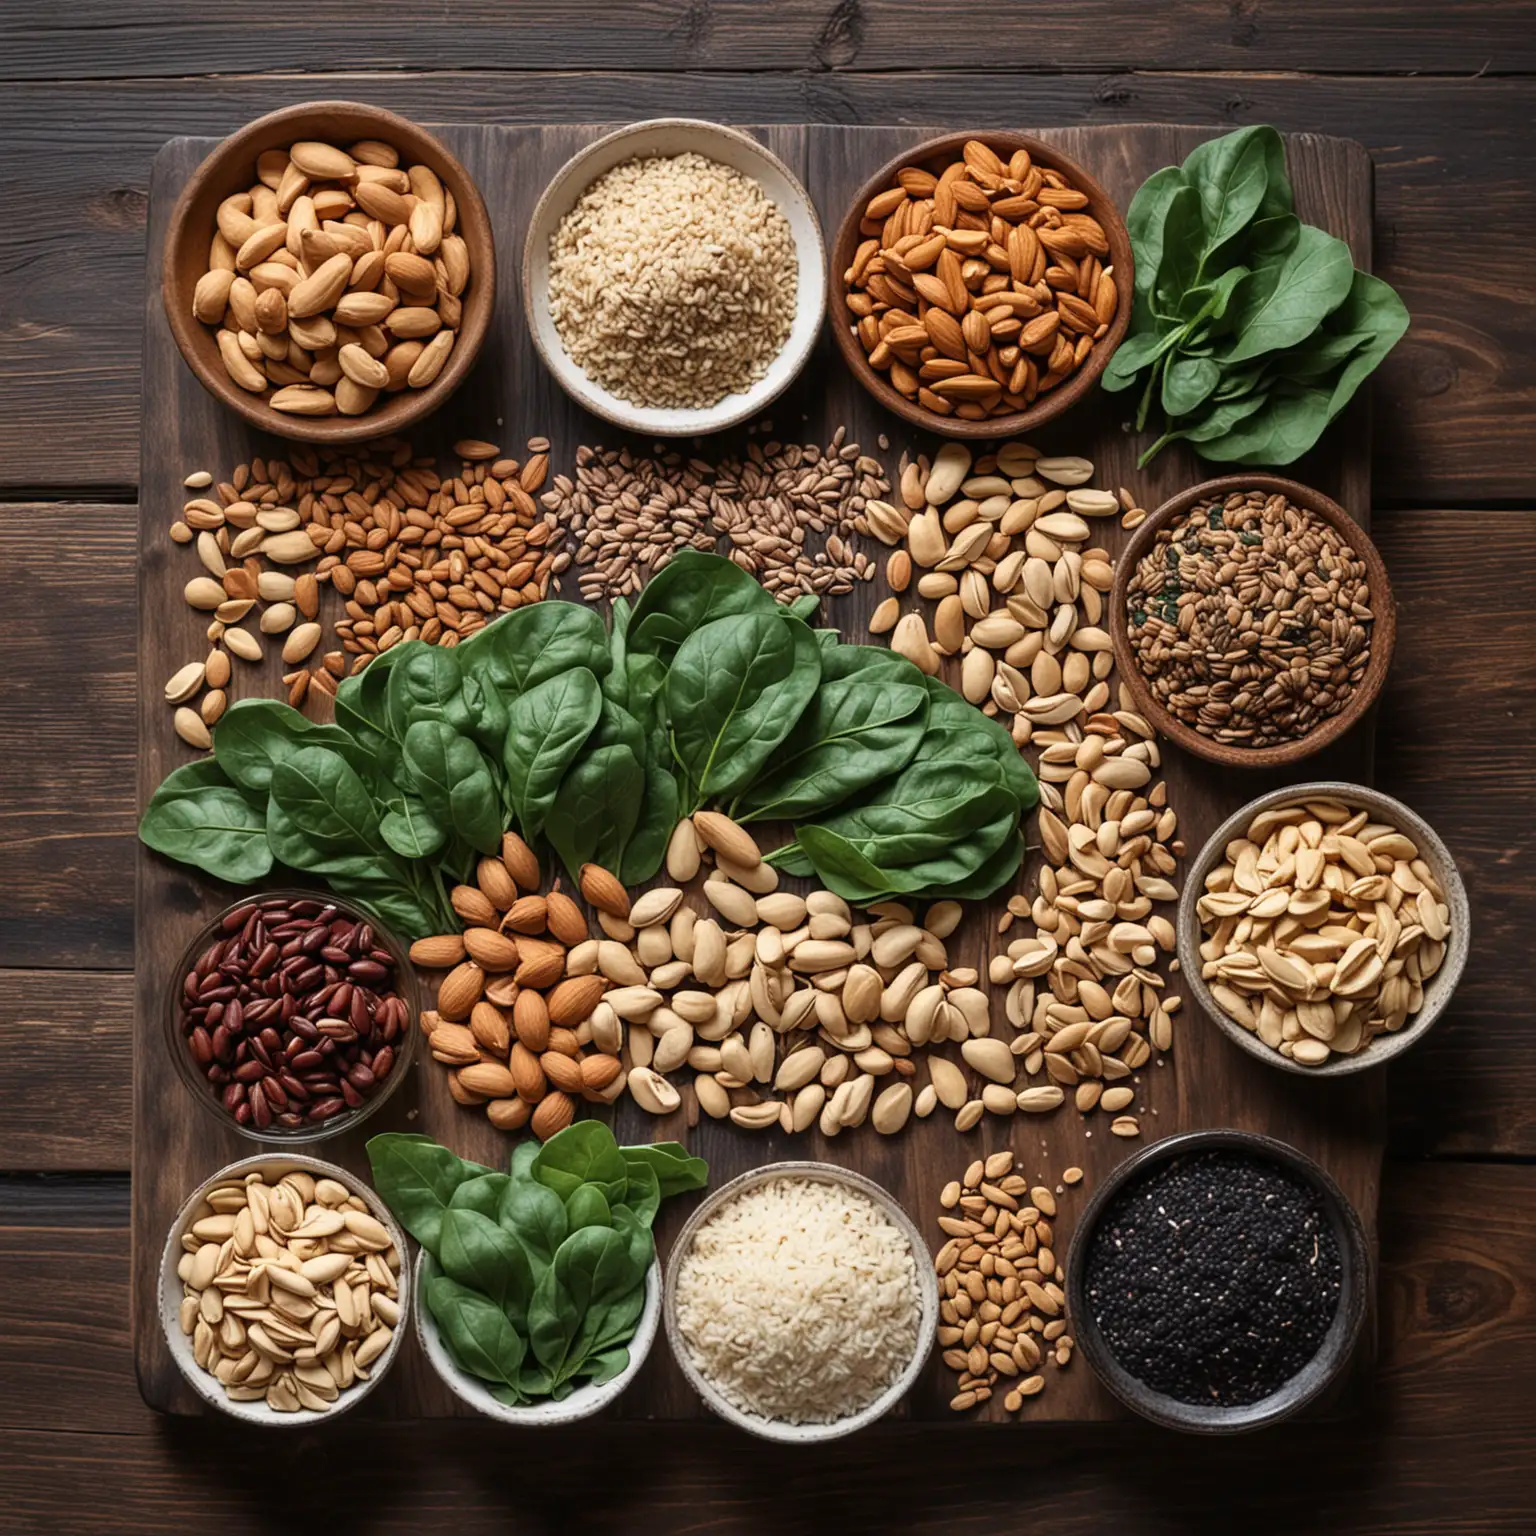 appetizing, attractive arrangement of foods on dark wooden table. foods to include: Spinach, pumpkin seeds, chia seeds, almonds, peanuts, cashews, black beans, potato, rice